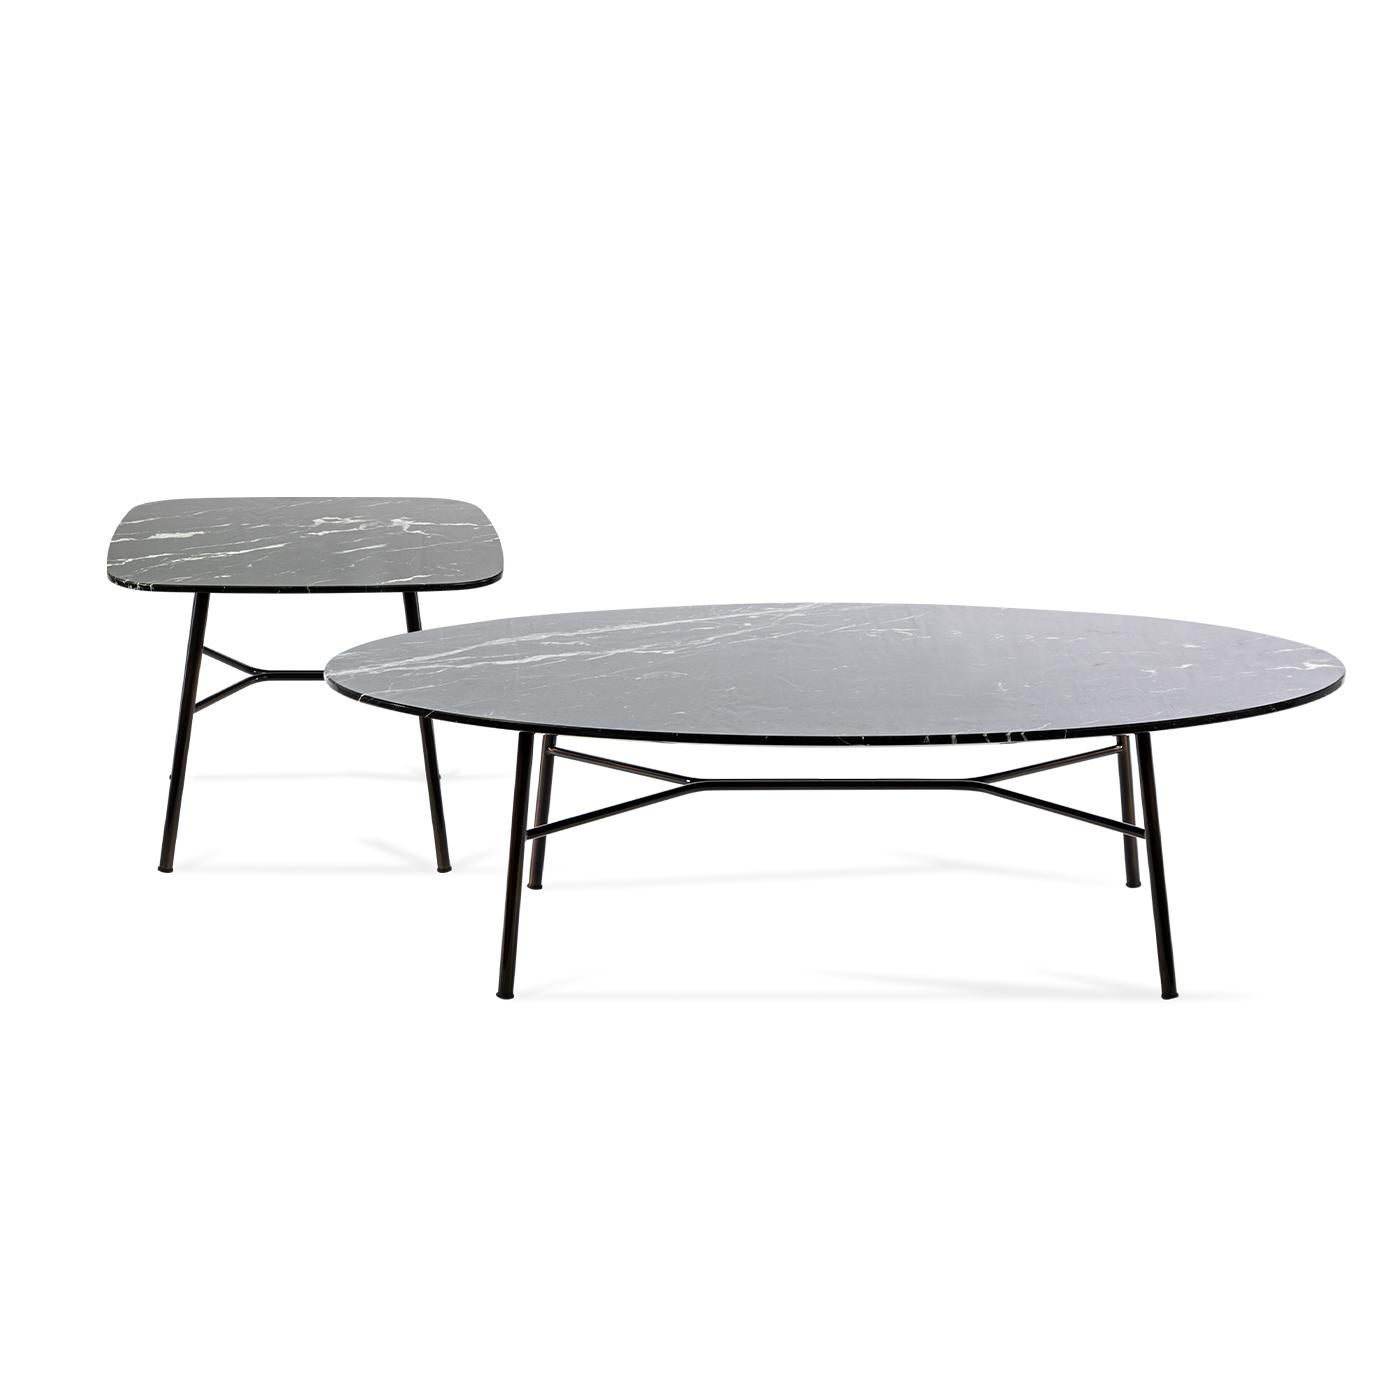 Italian Yuki Oval Coffee Table with Black Marquinia Top #1 by EP Studio For Sale